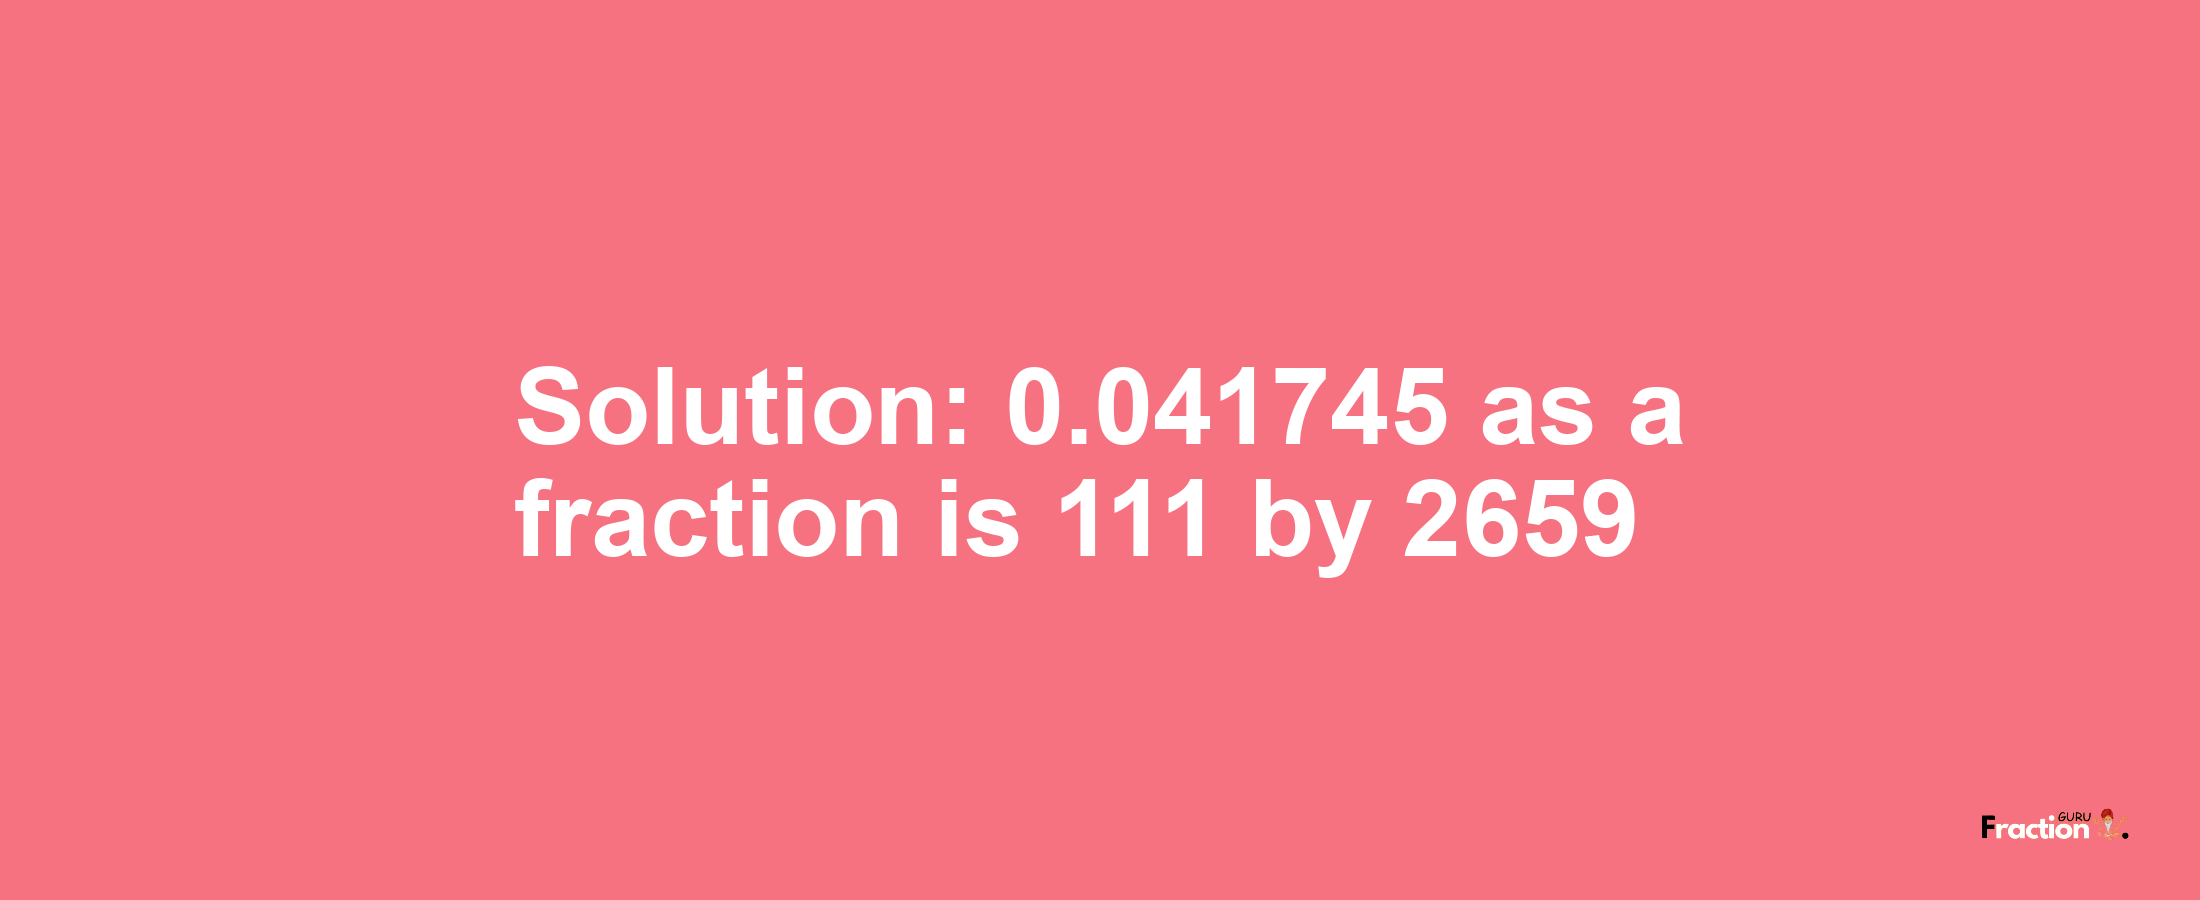 Solution:0.041745 as a fraction is 111/2659